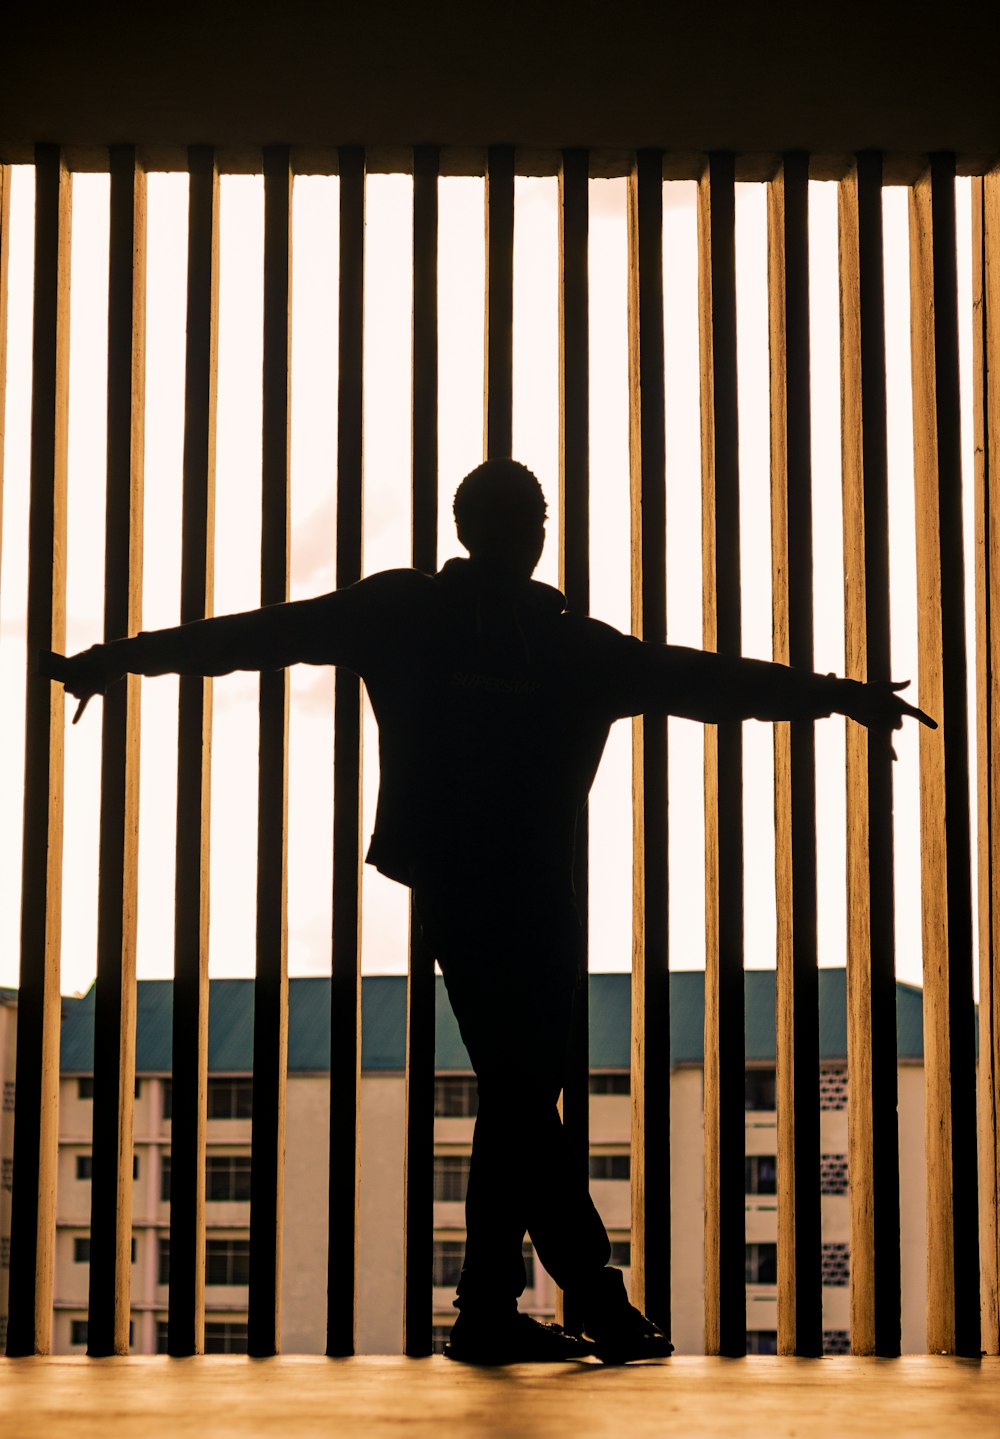 a man standing in front of a jail cell